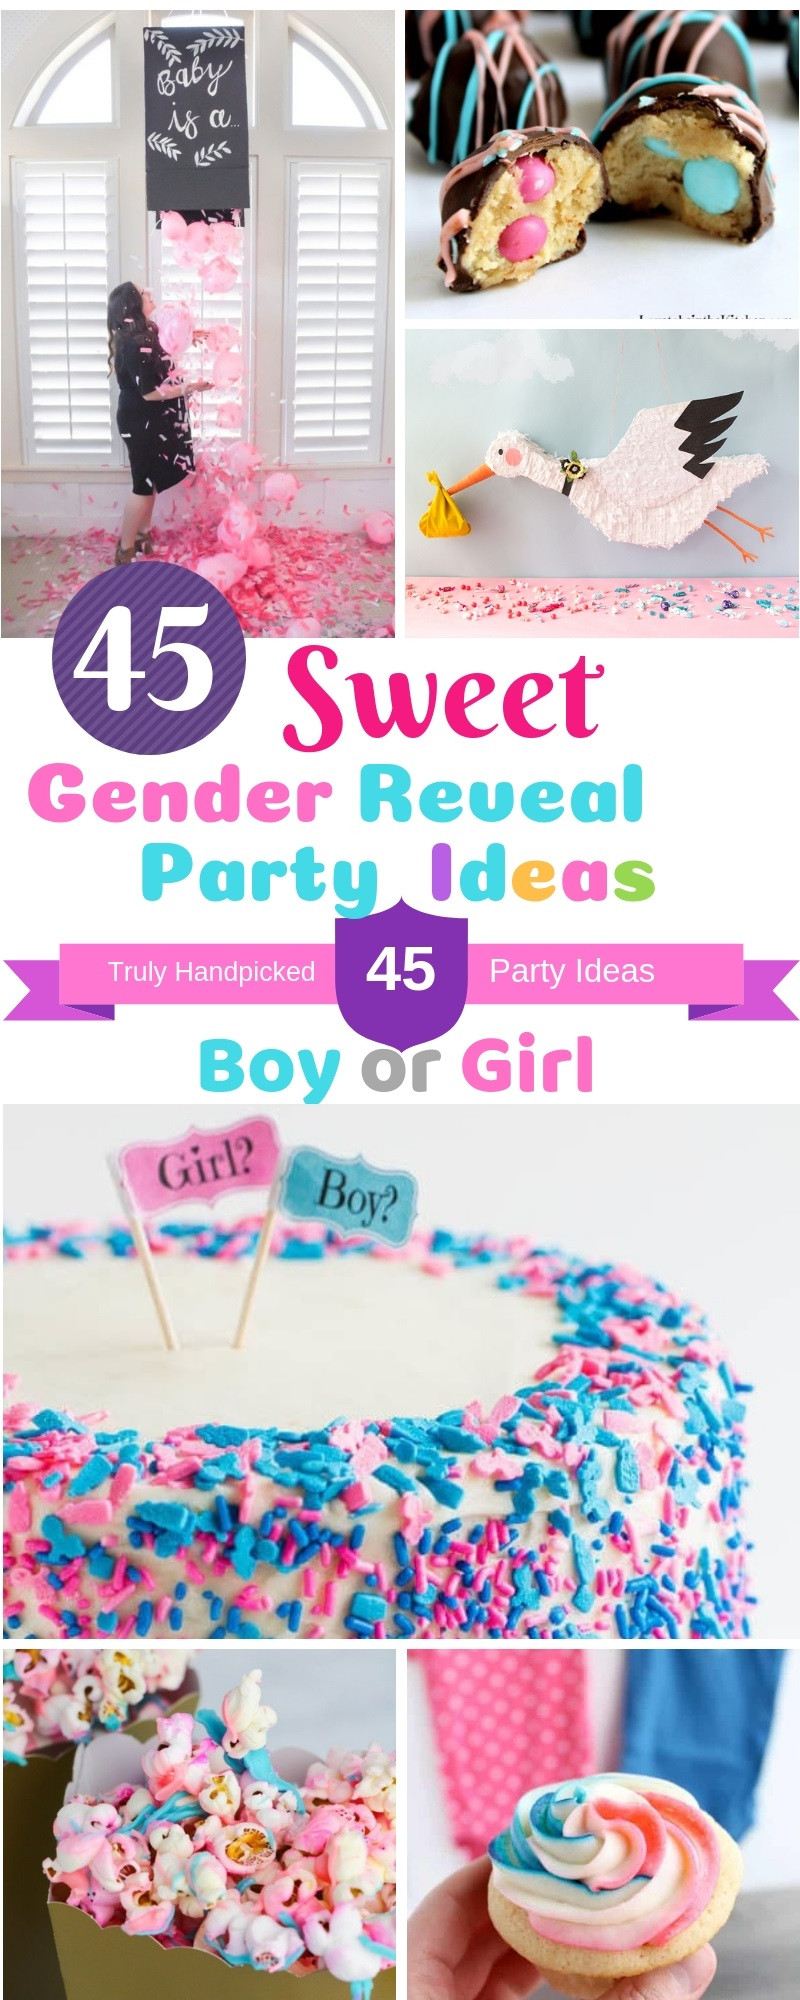 Reveal The Gender Party Ideas
 45 DIY Gender Reveal Party Ideas Creative and Sweet Ideas